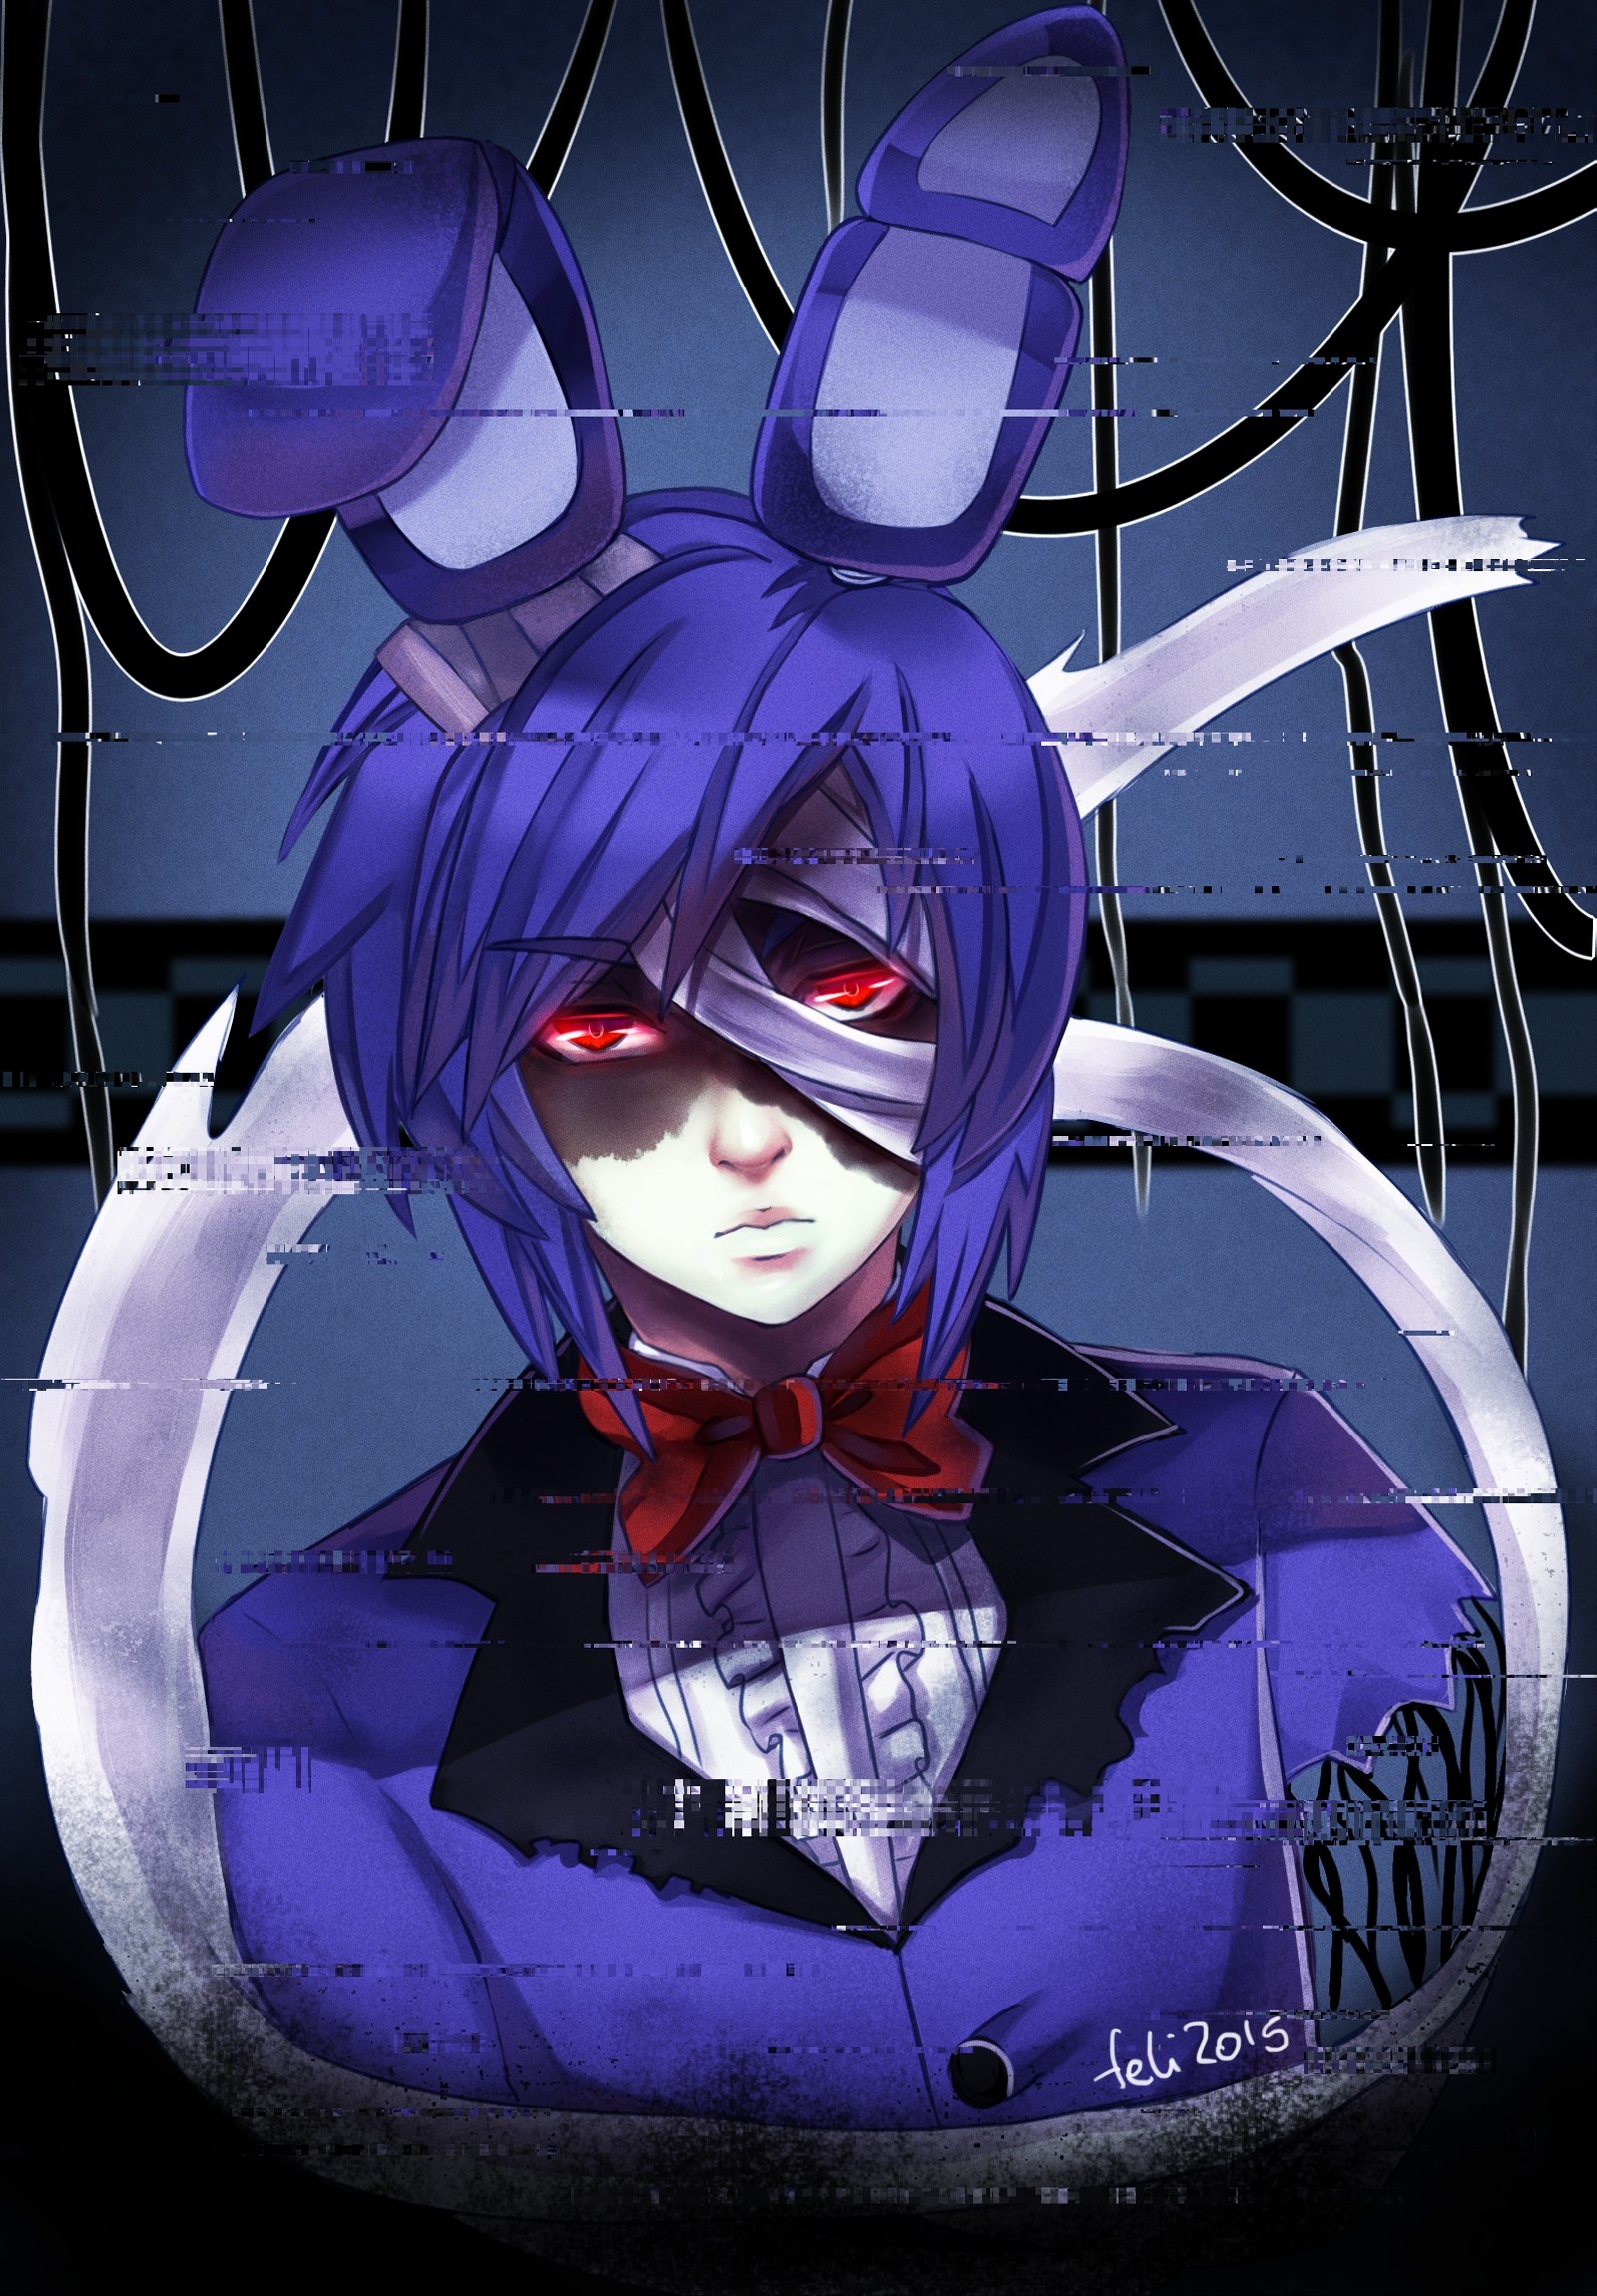 View Fullsize Bonnie (Five Nights at Freddy's) Image